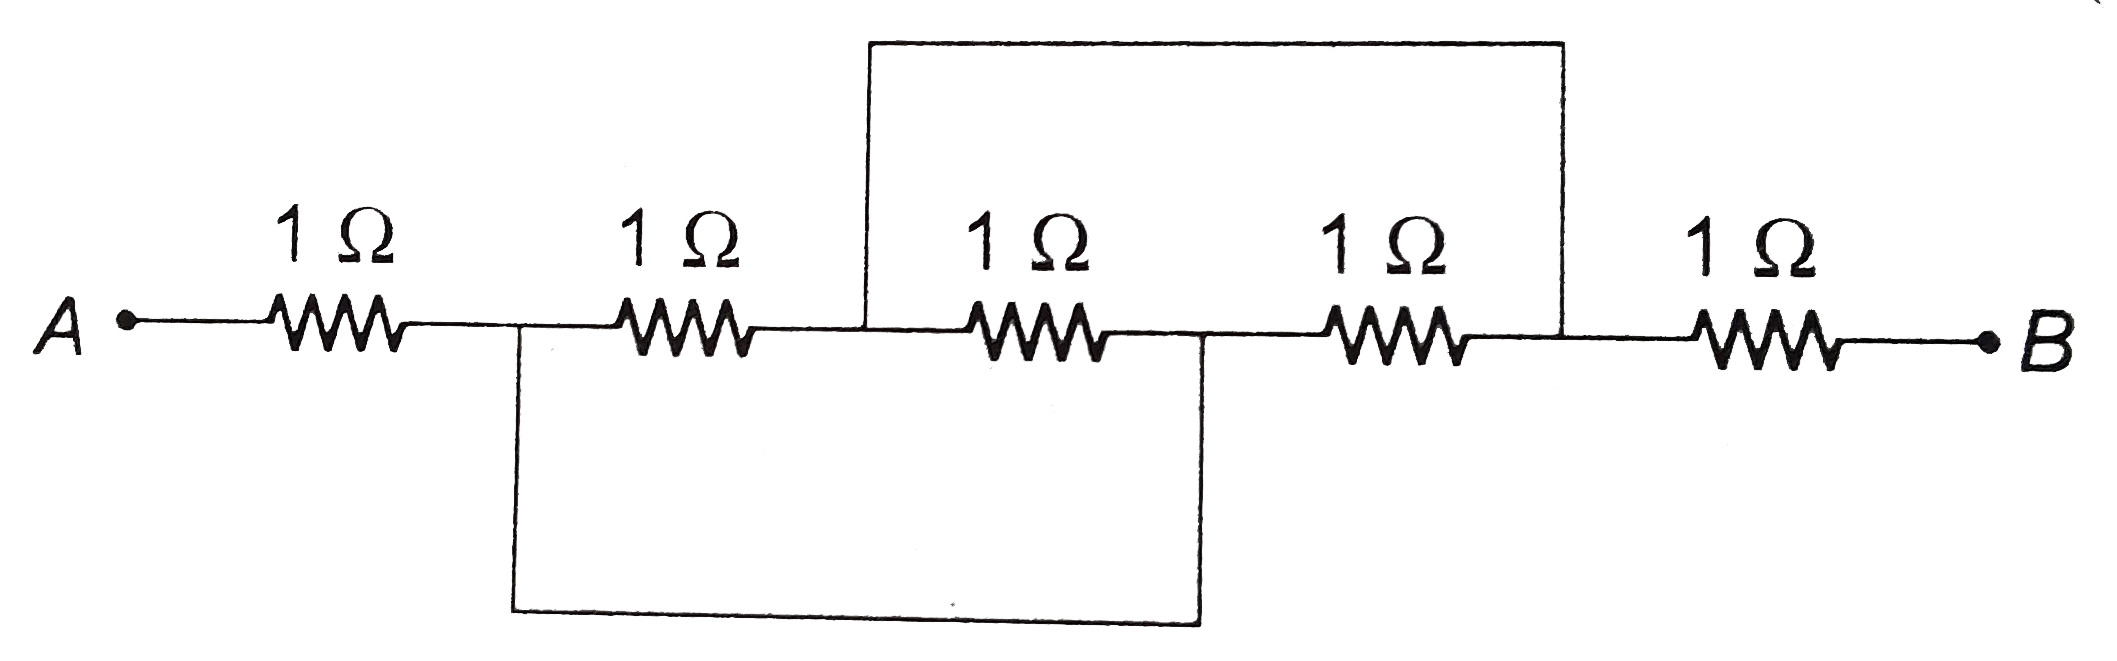 Equivalent resistance between the points A and B (in Omega)   .